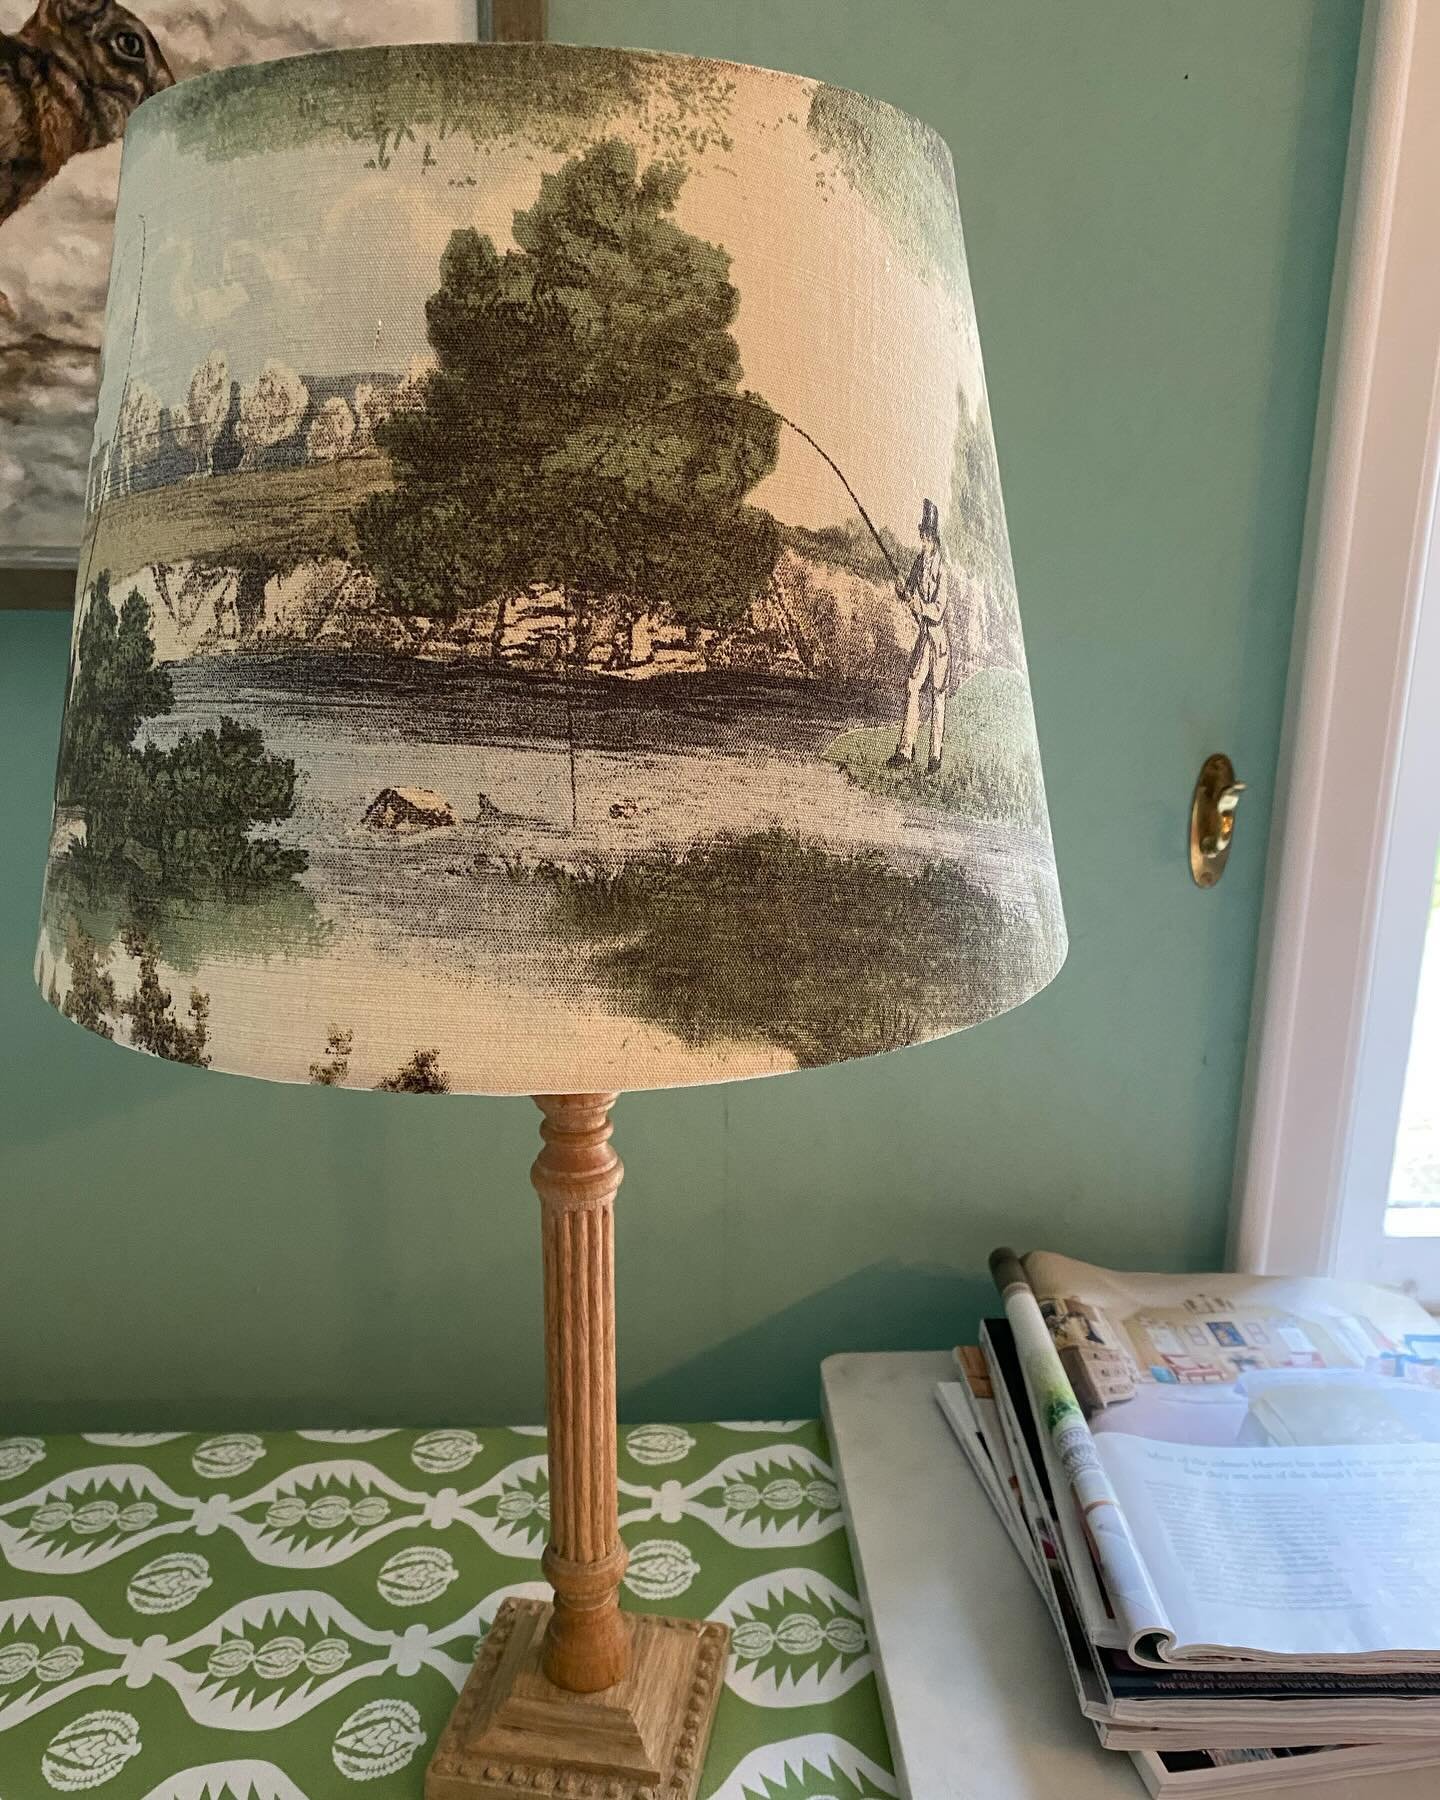 The lampshade with traditional fishing gentlemen is going to be placed in a gorgeous newly renovated house near Hexham.  #fishing #gentlemen #bespoke #lighting #interiors